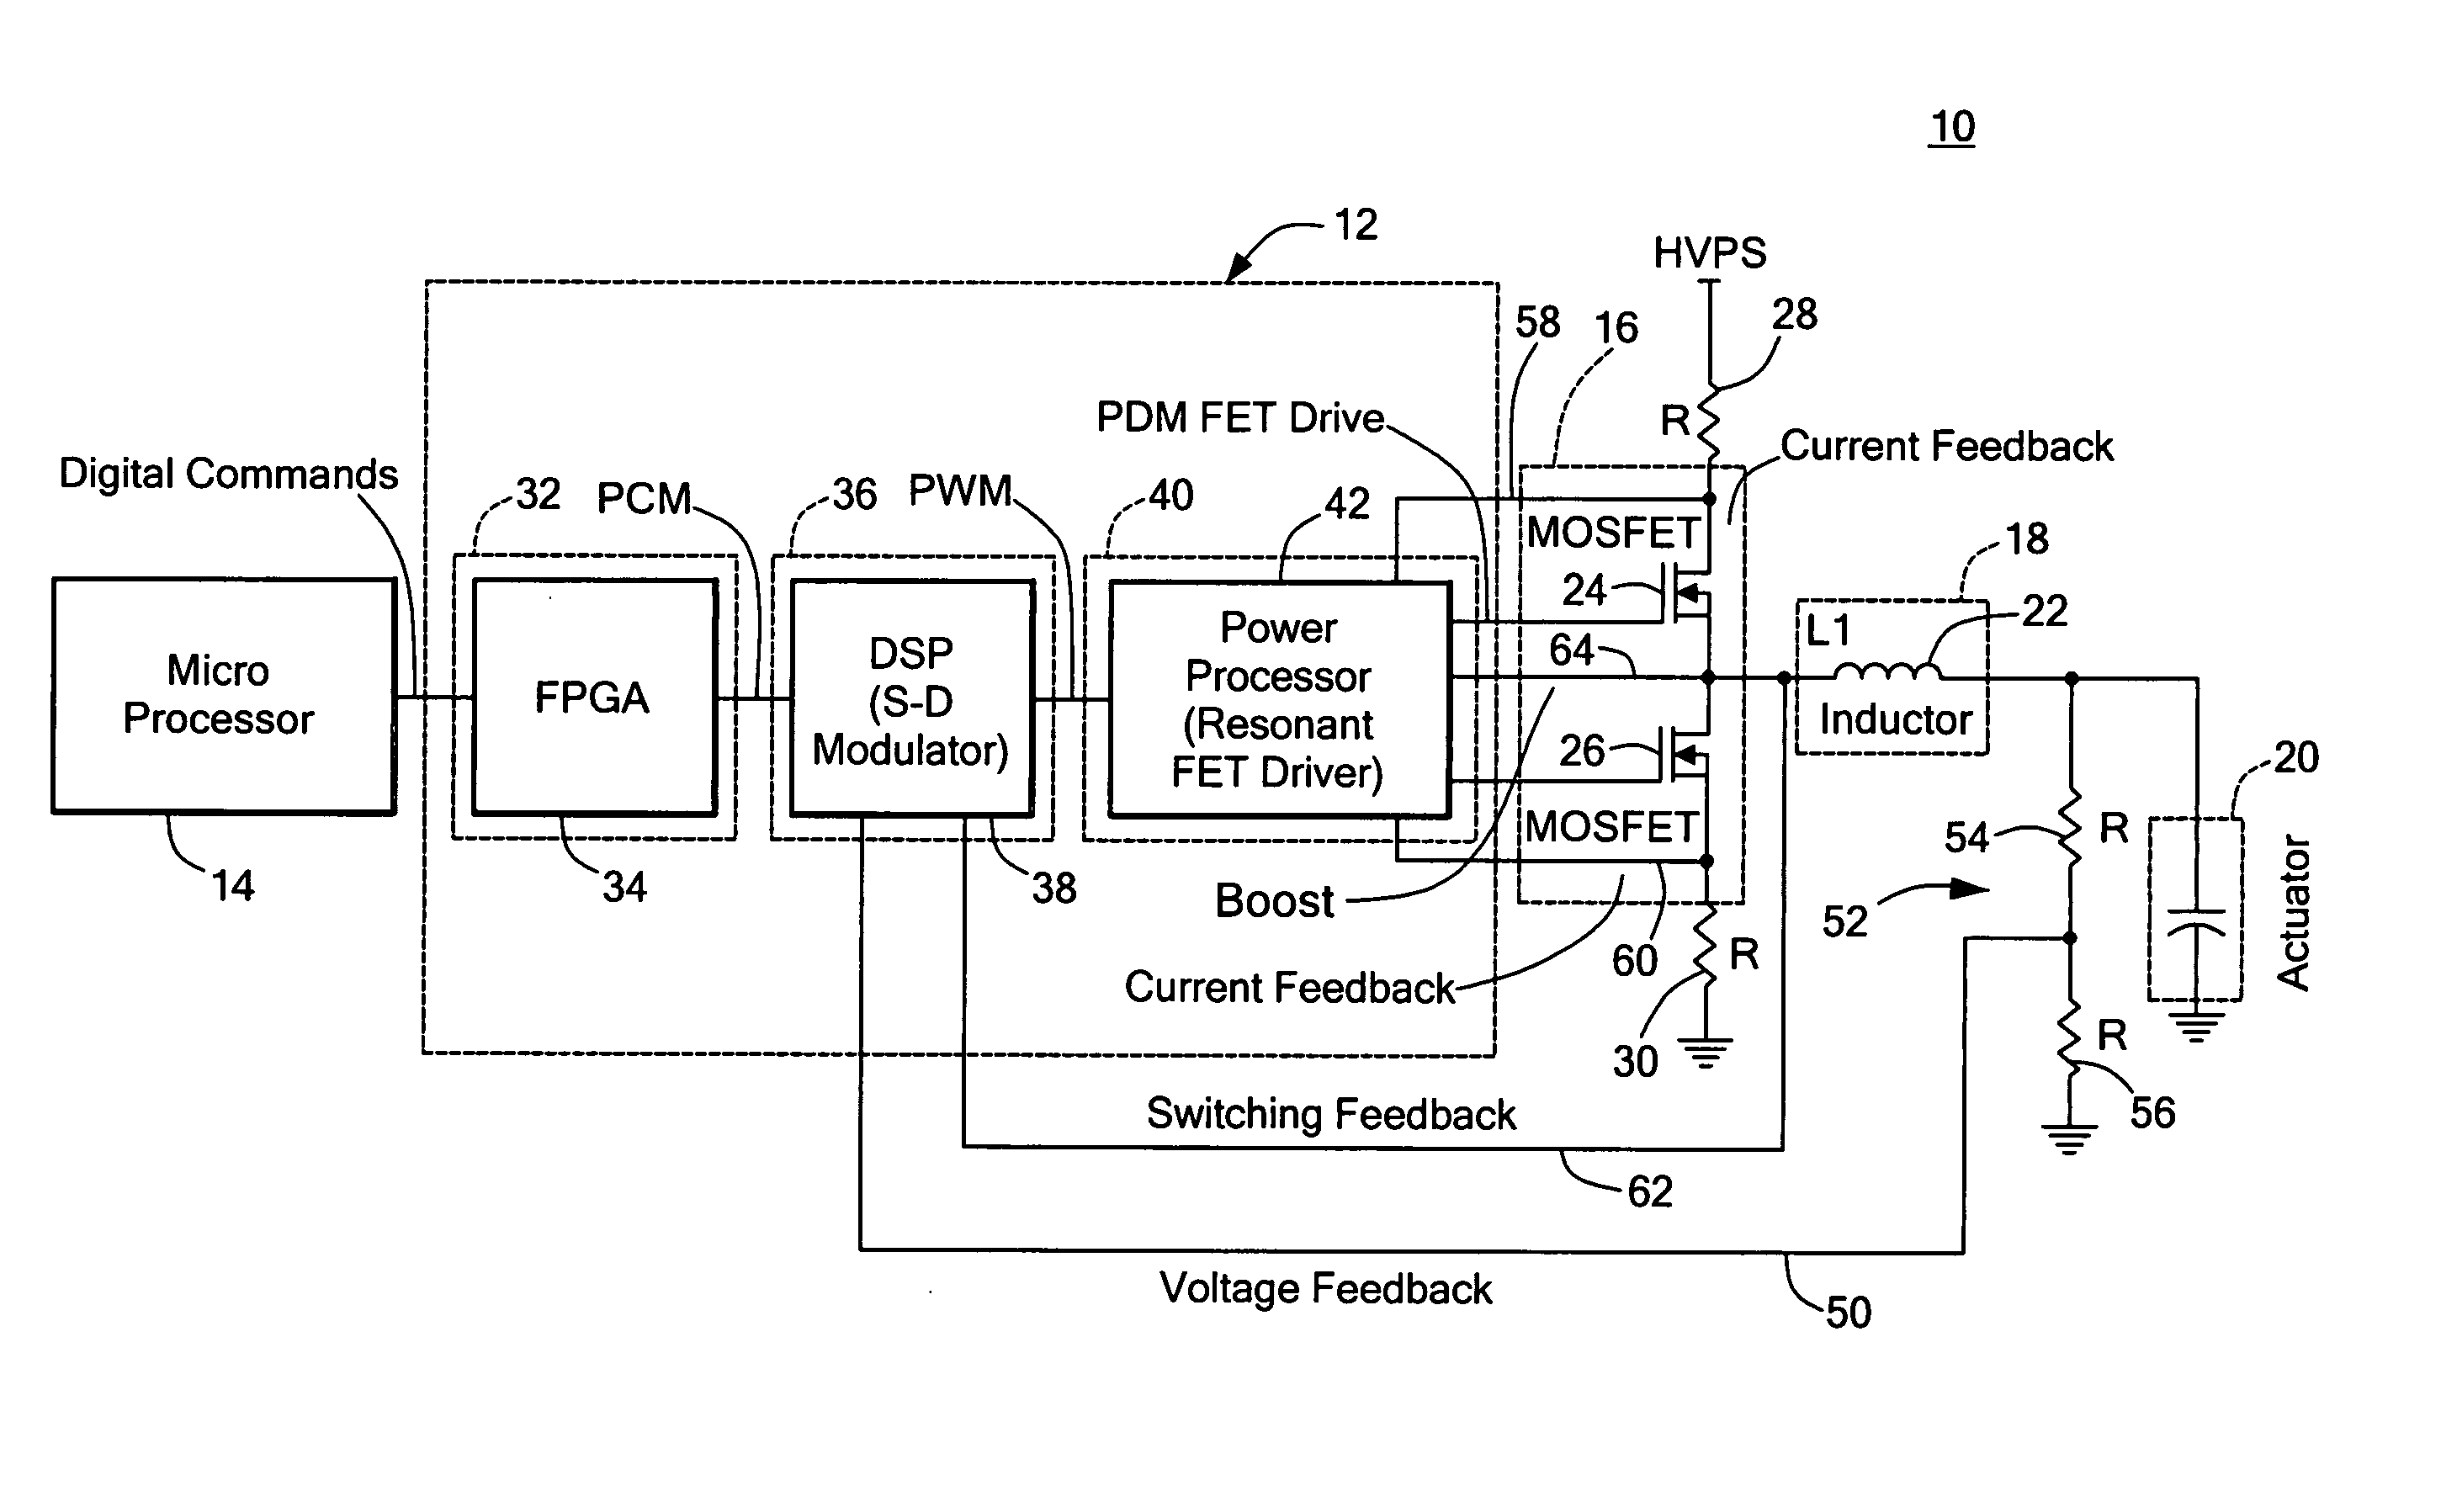 Digital amplifier system for driving a capacitive load